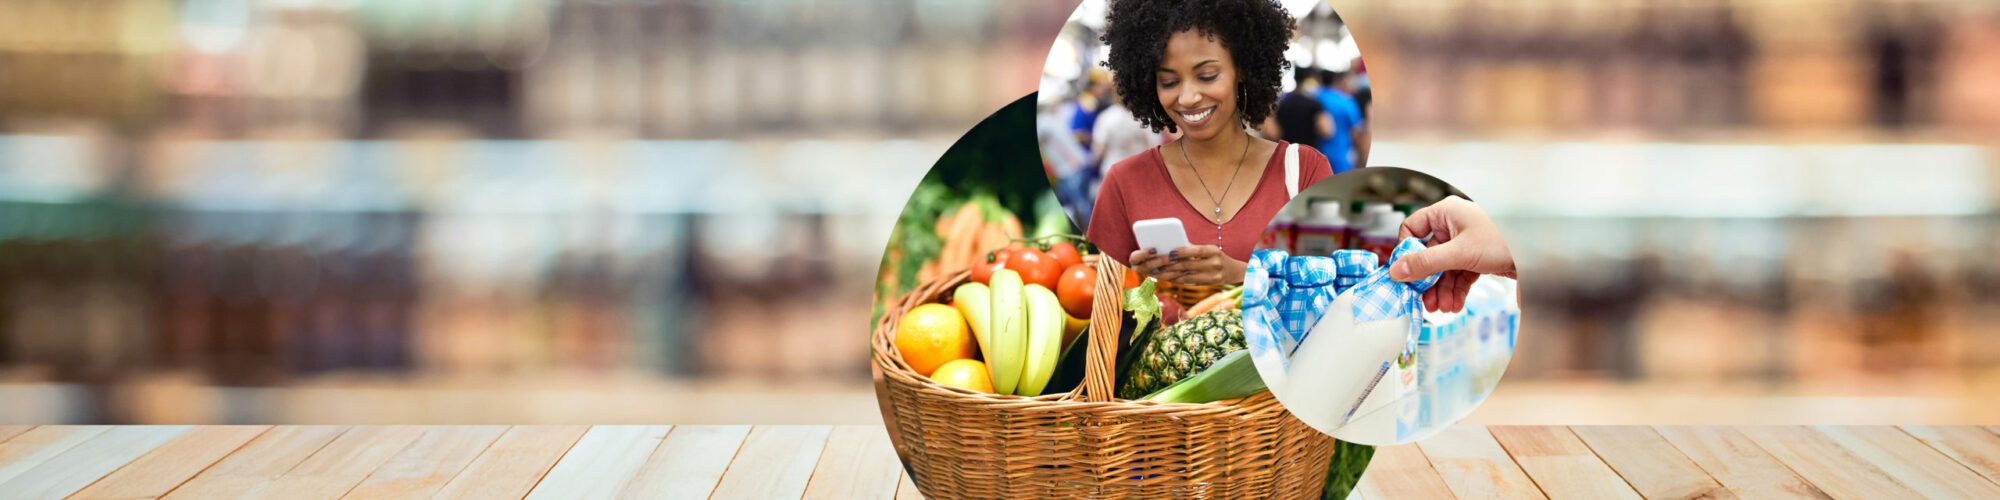 Picture of a woman with smartphone in the supermarket, next to it a basket full of fruit and vegetables and a milk bottle, valantic industries: consumer goods industry